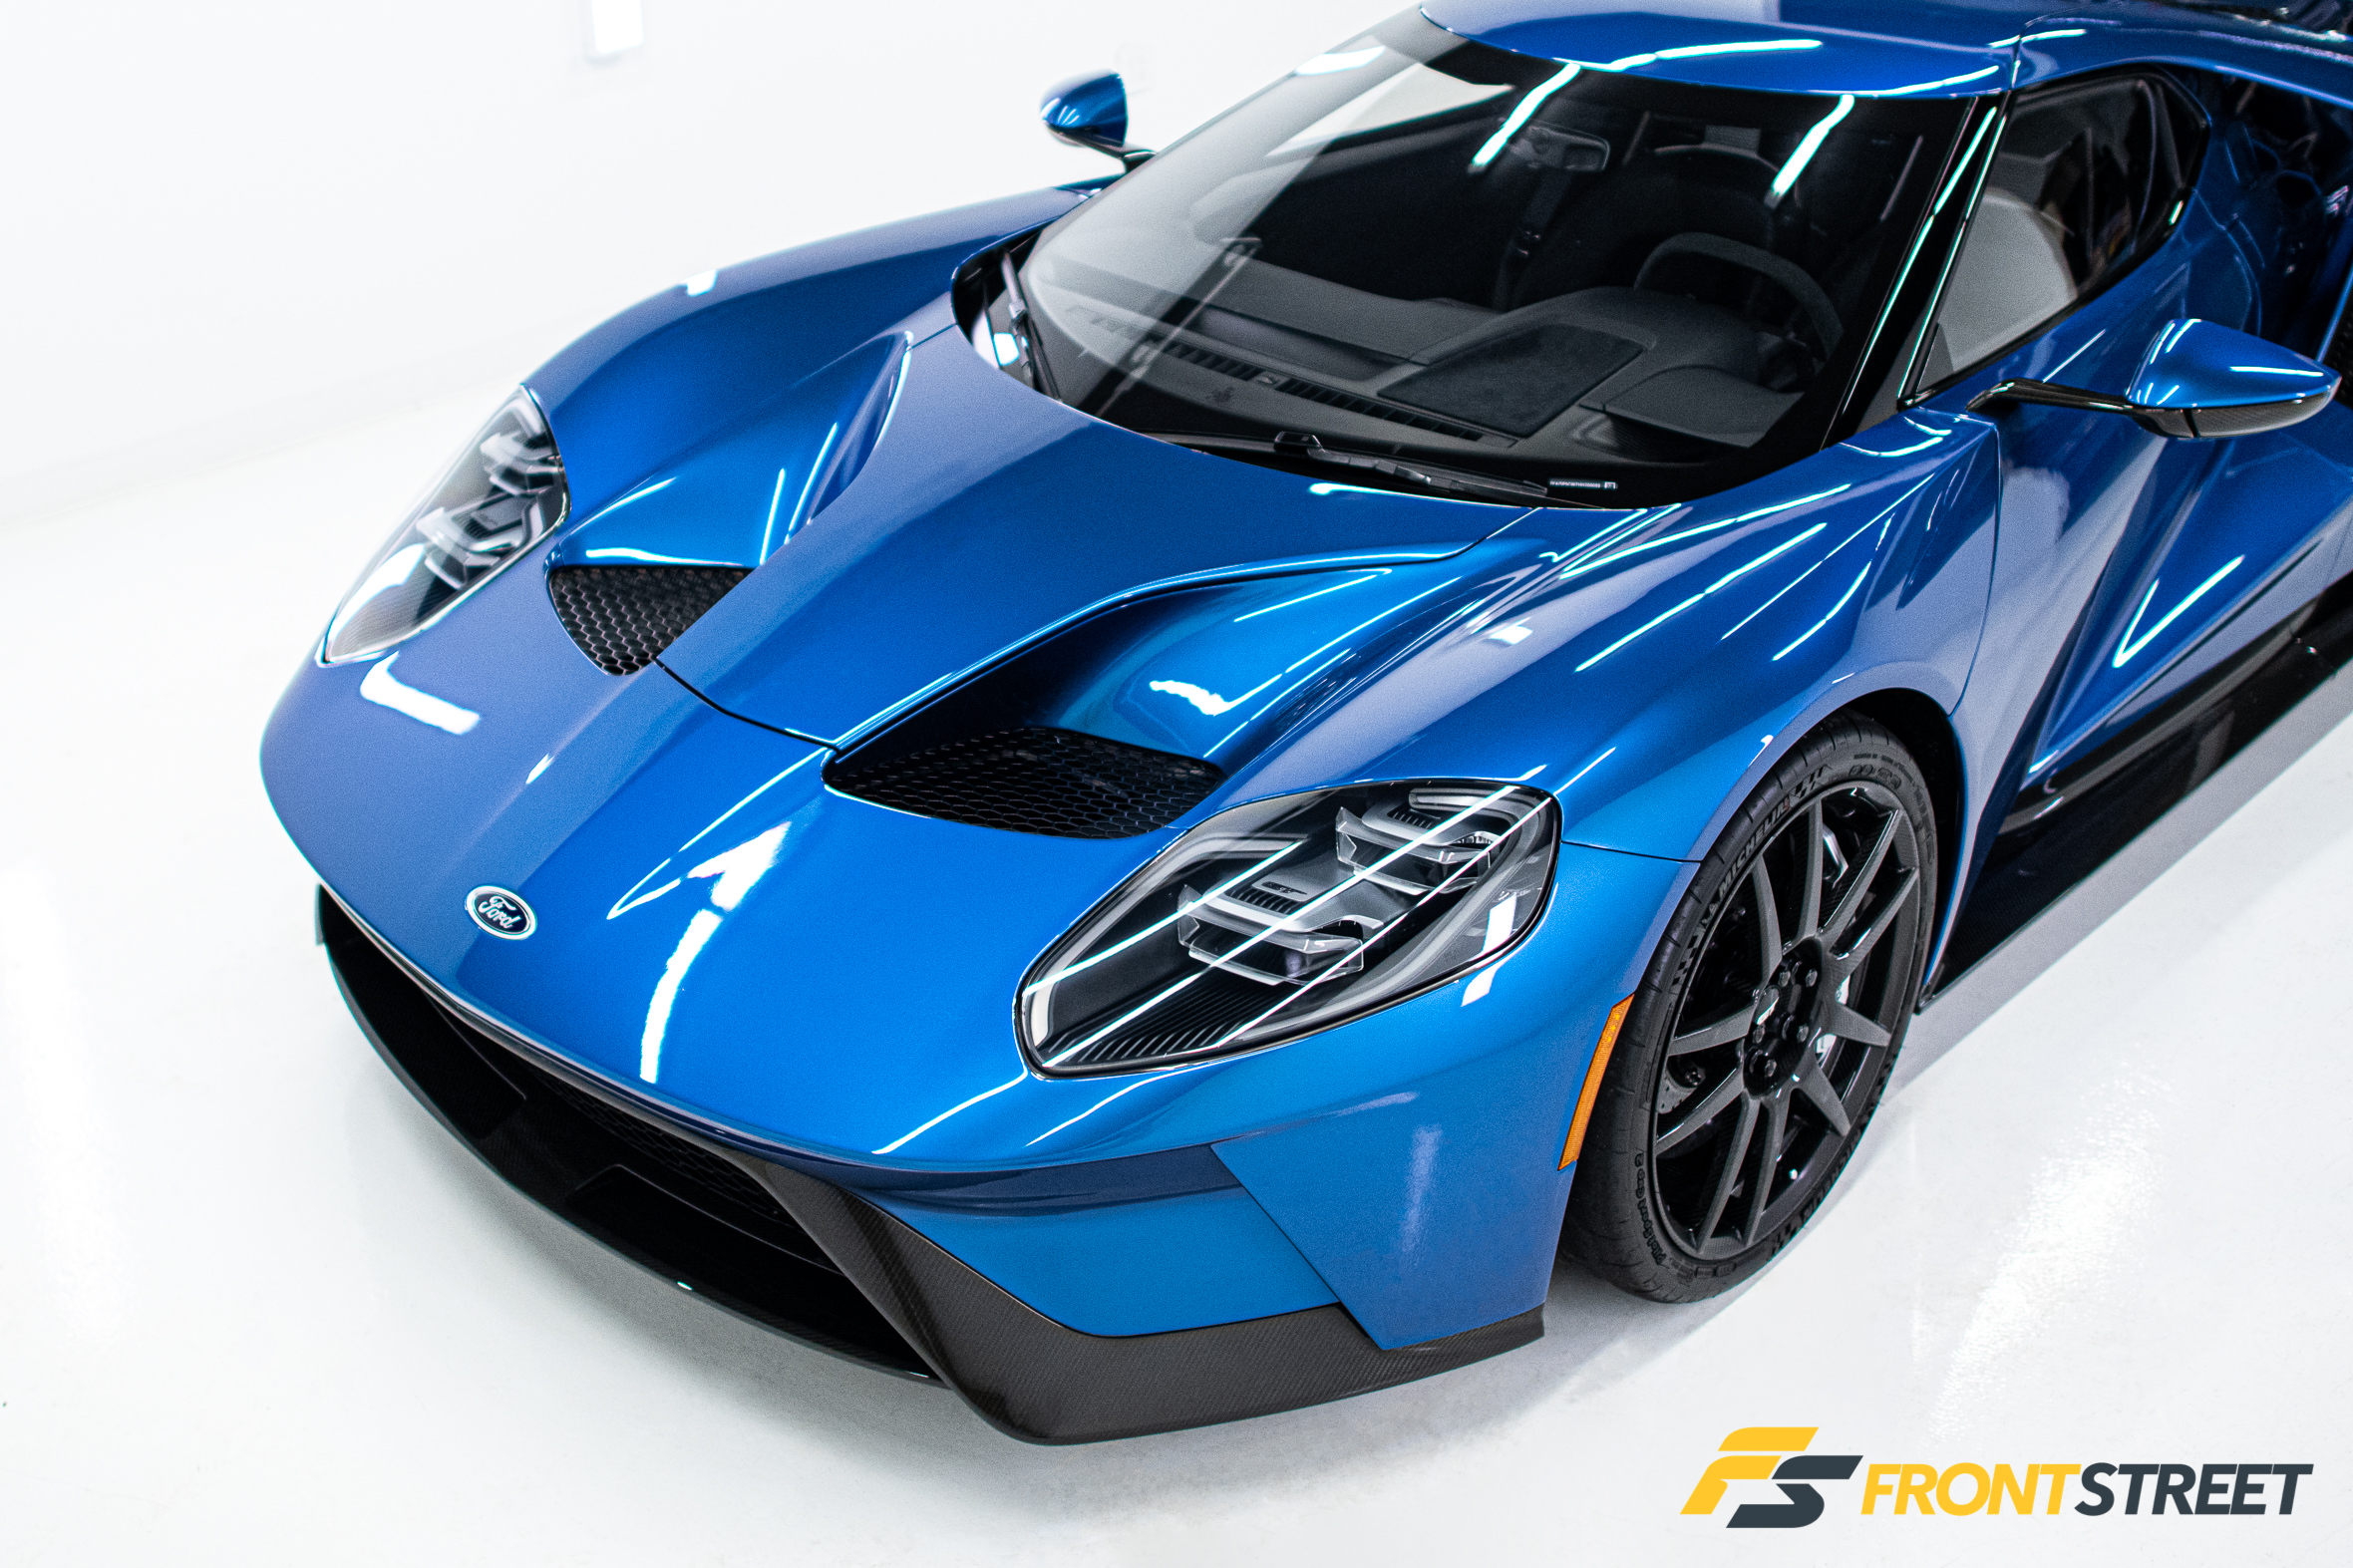 Poring Over The Details With The Ford GT And Oakes Detail